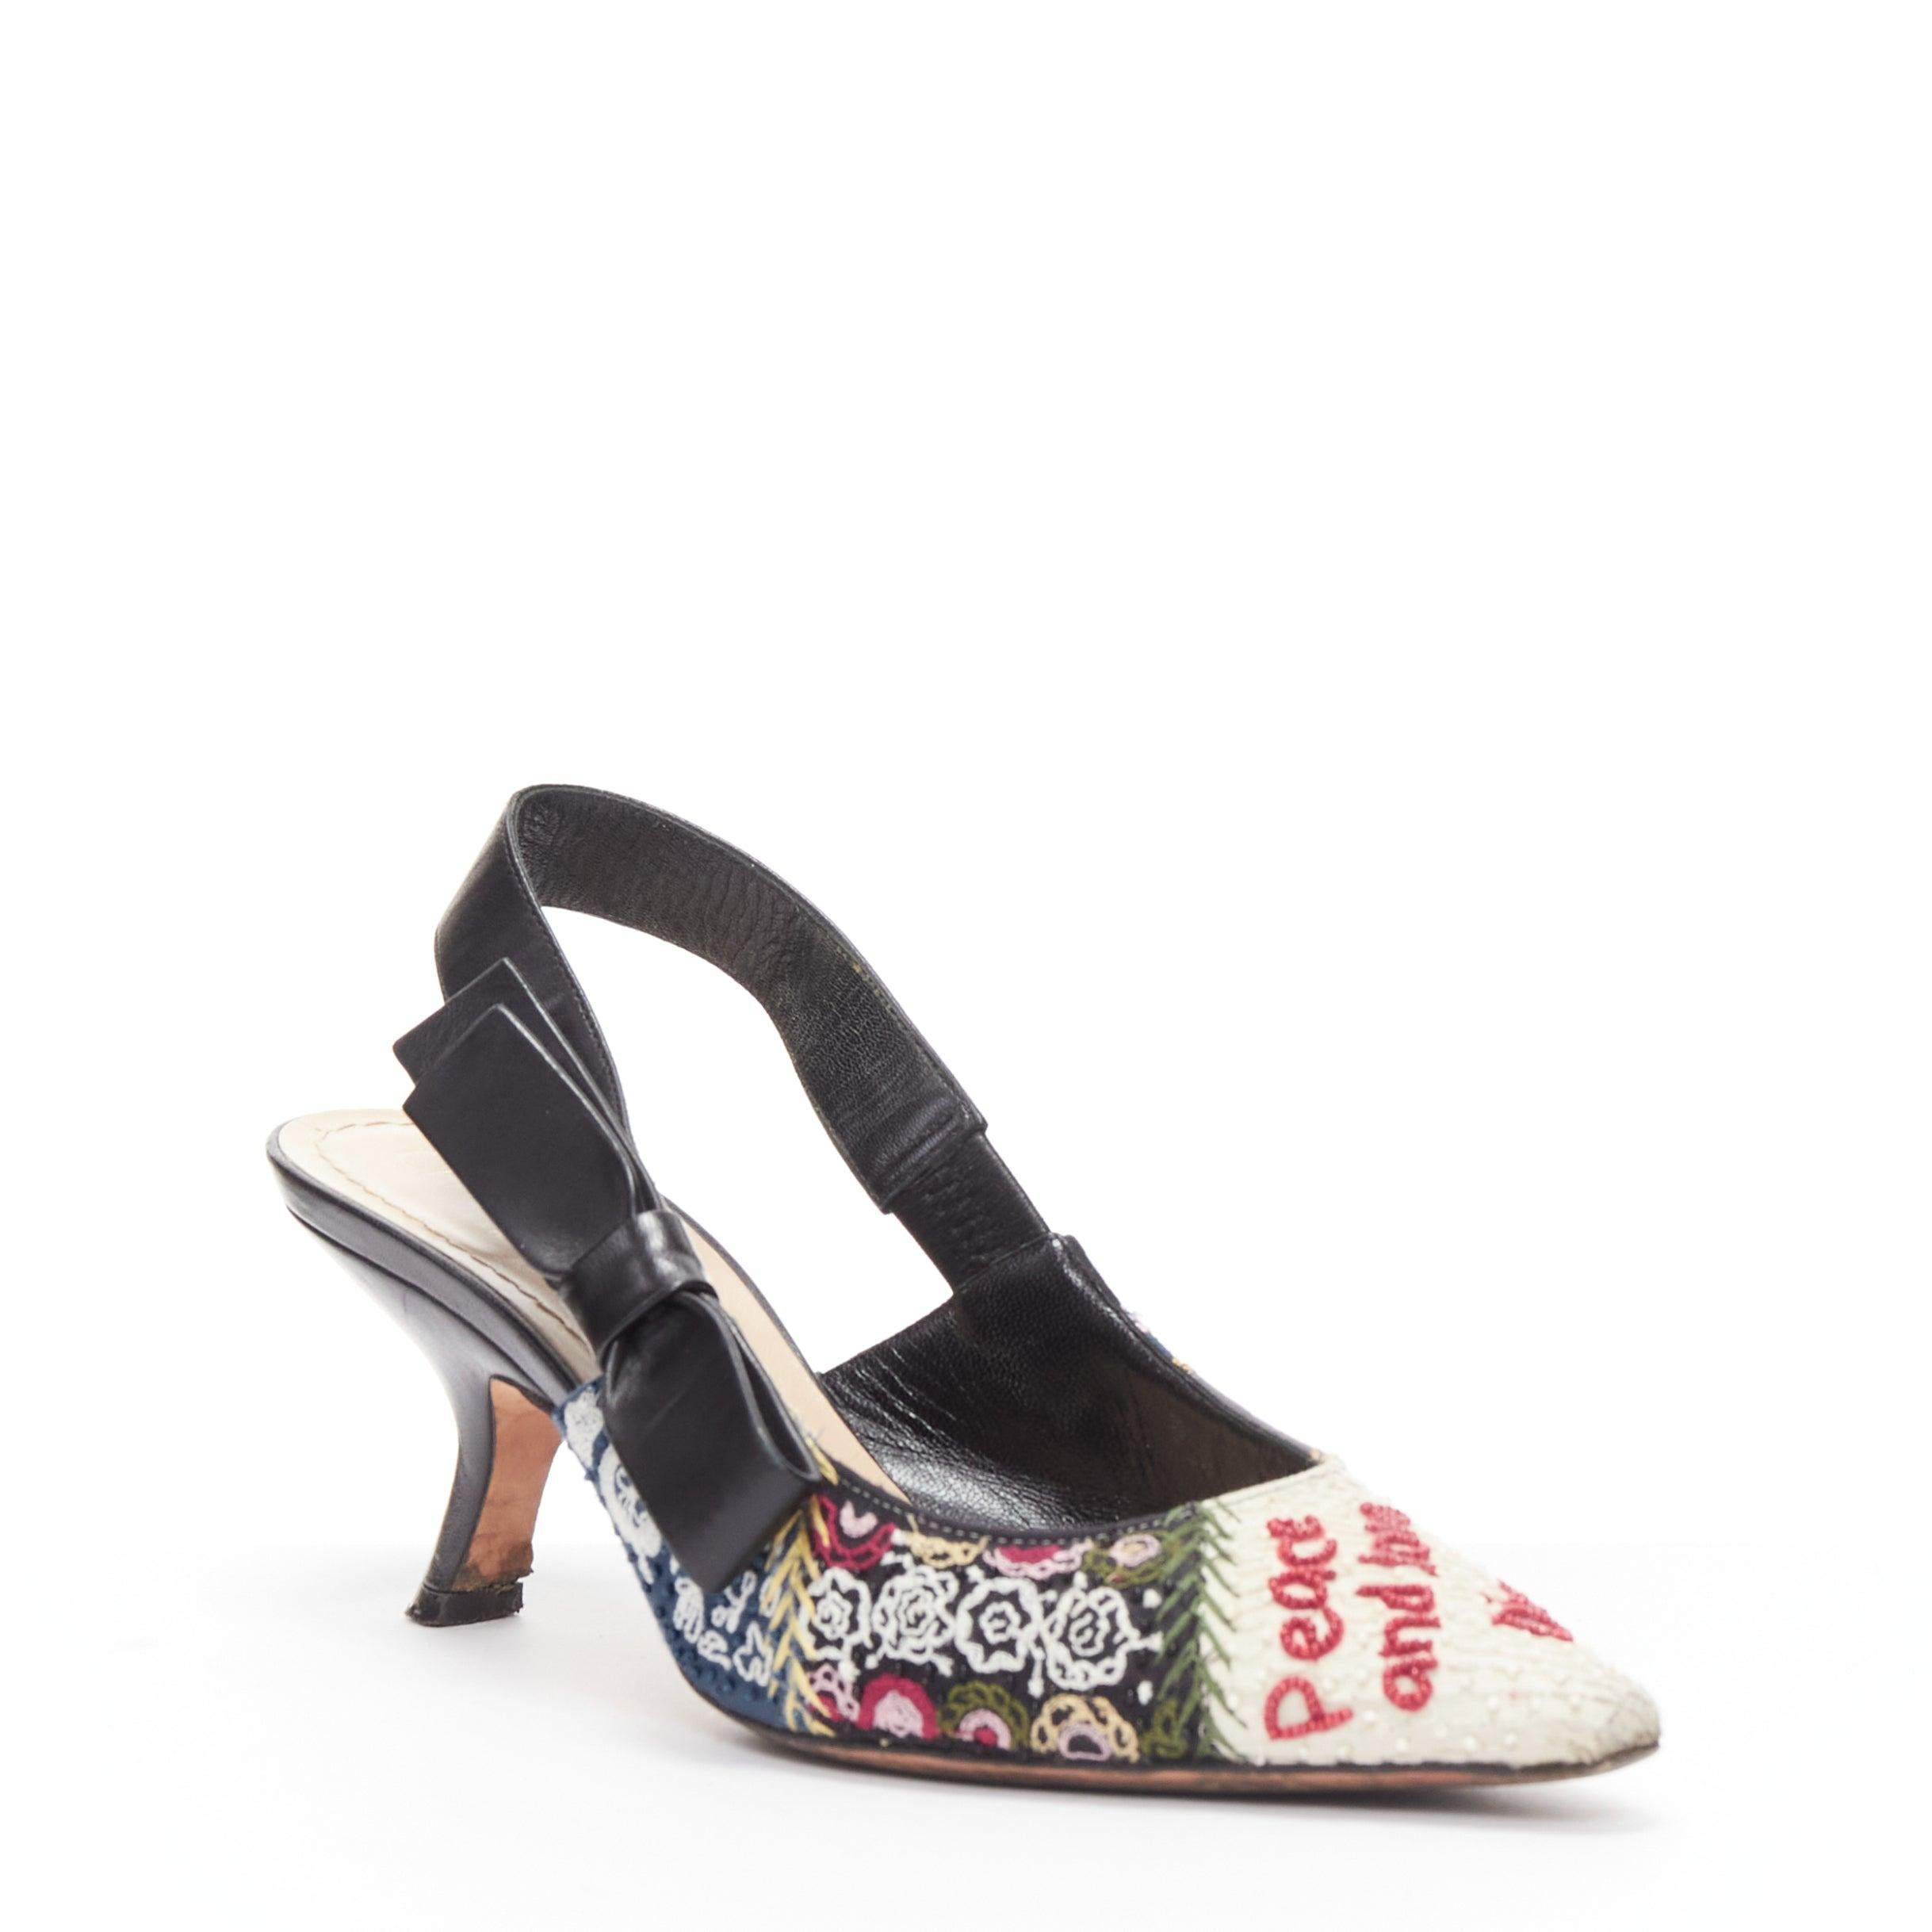 CHRISTIAN DIOR Peace Love bead embroidery bow sling back comma heel pump EU36
Reference: JACG/A00148
Brand: Christian Dior
Material: Fabric, Leather
Color: Multicolour
Pattern: Floral
Closure: Slingback
Lining: Brown Leather
Extra Details: